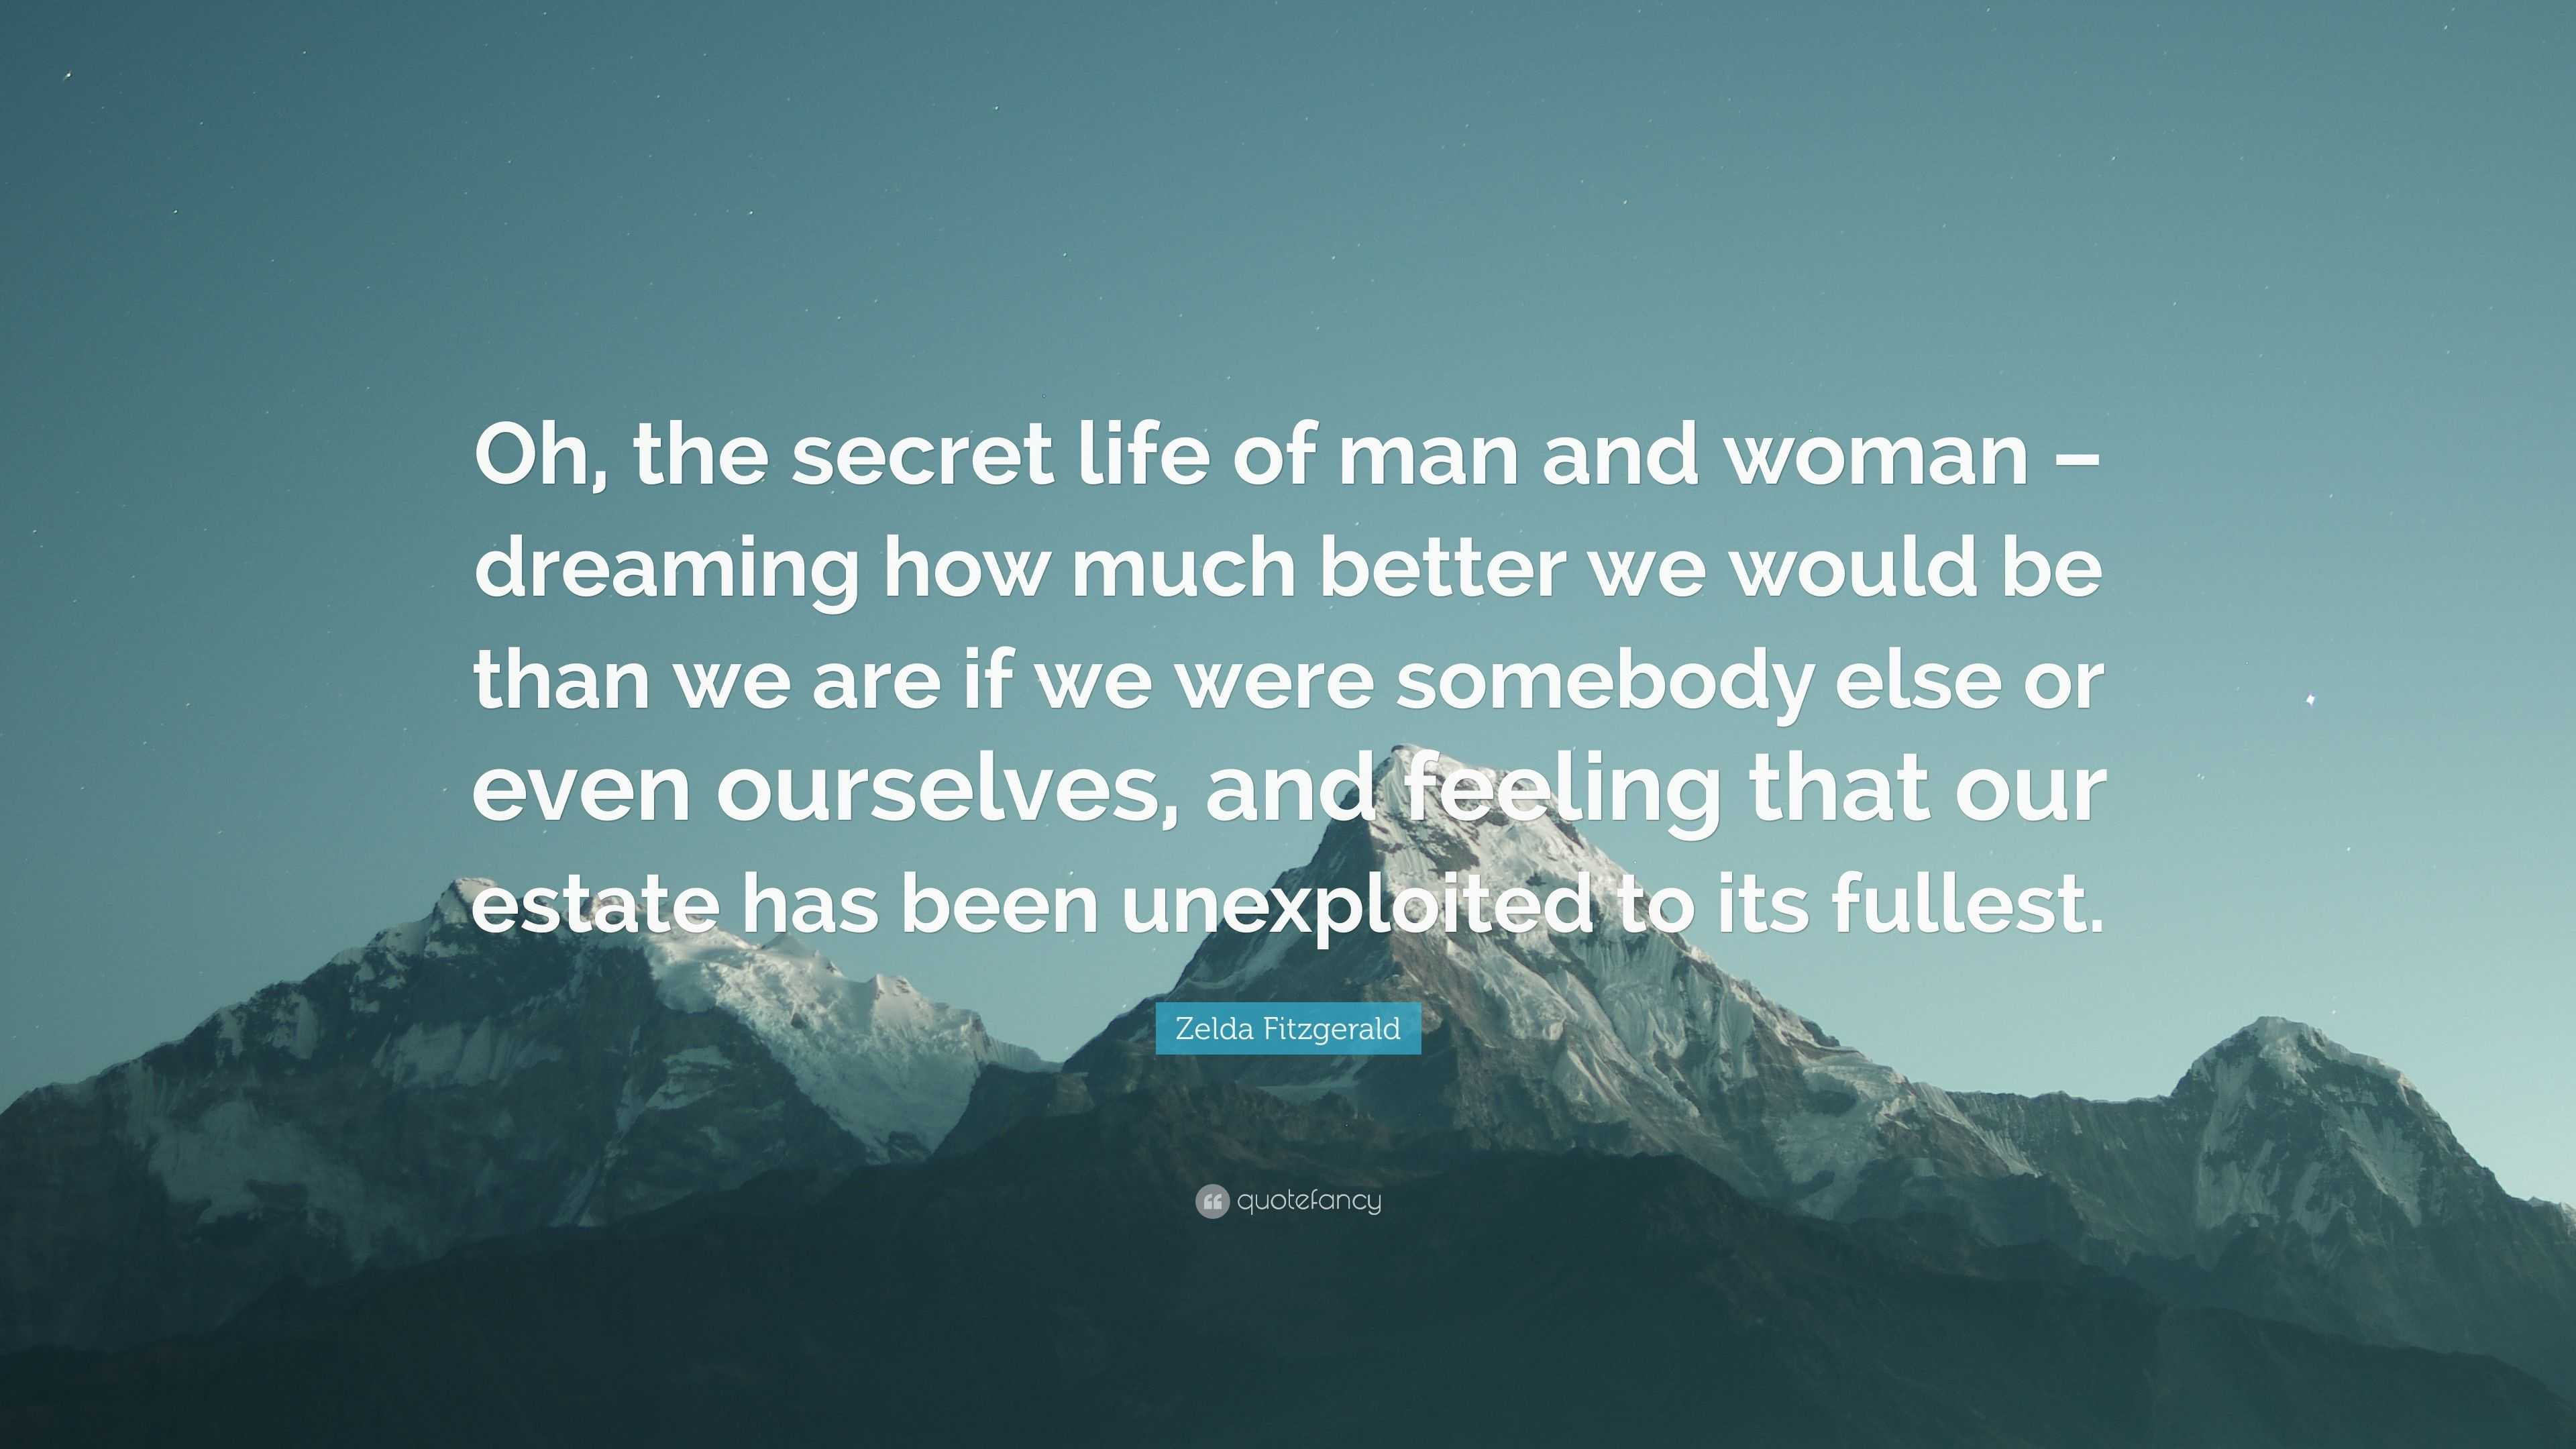 Zelda Fitzgerald Quote: “Oh, the secret life of man and woman ...